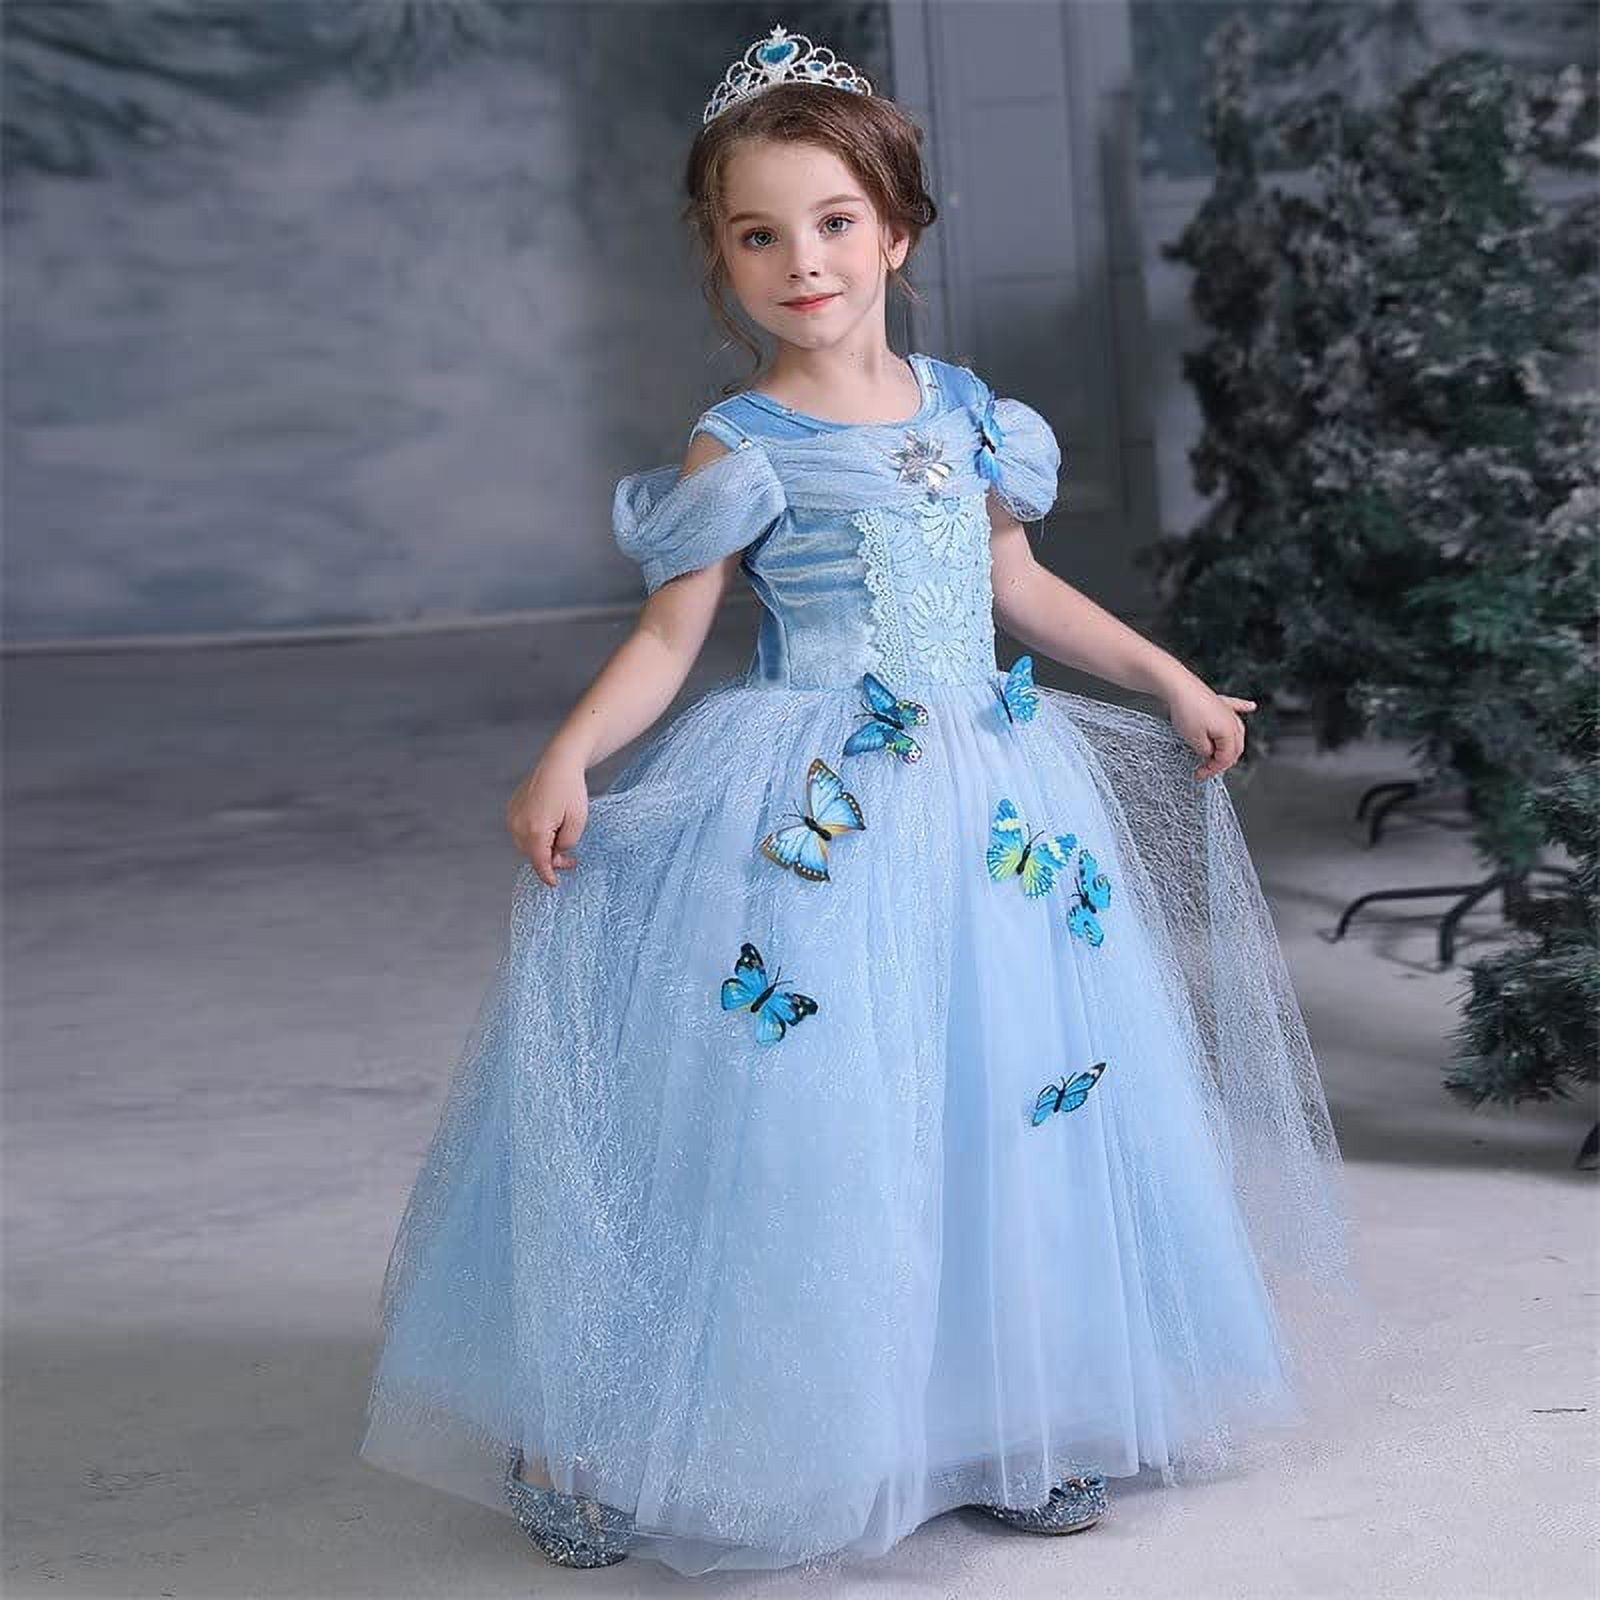 Womens Cinderella At The Ball Costume | Cinderella Costume for Women